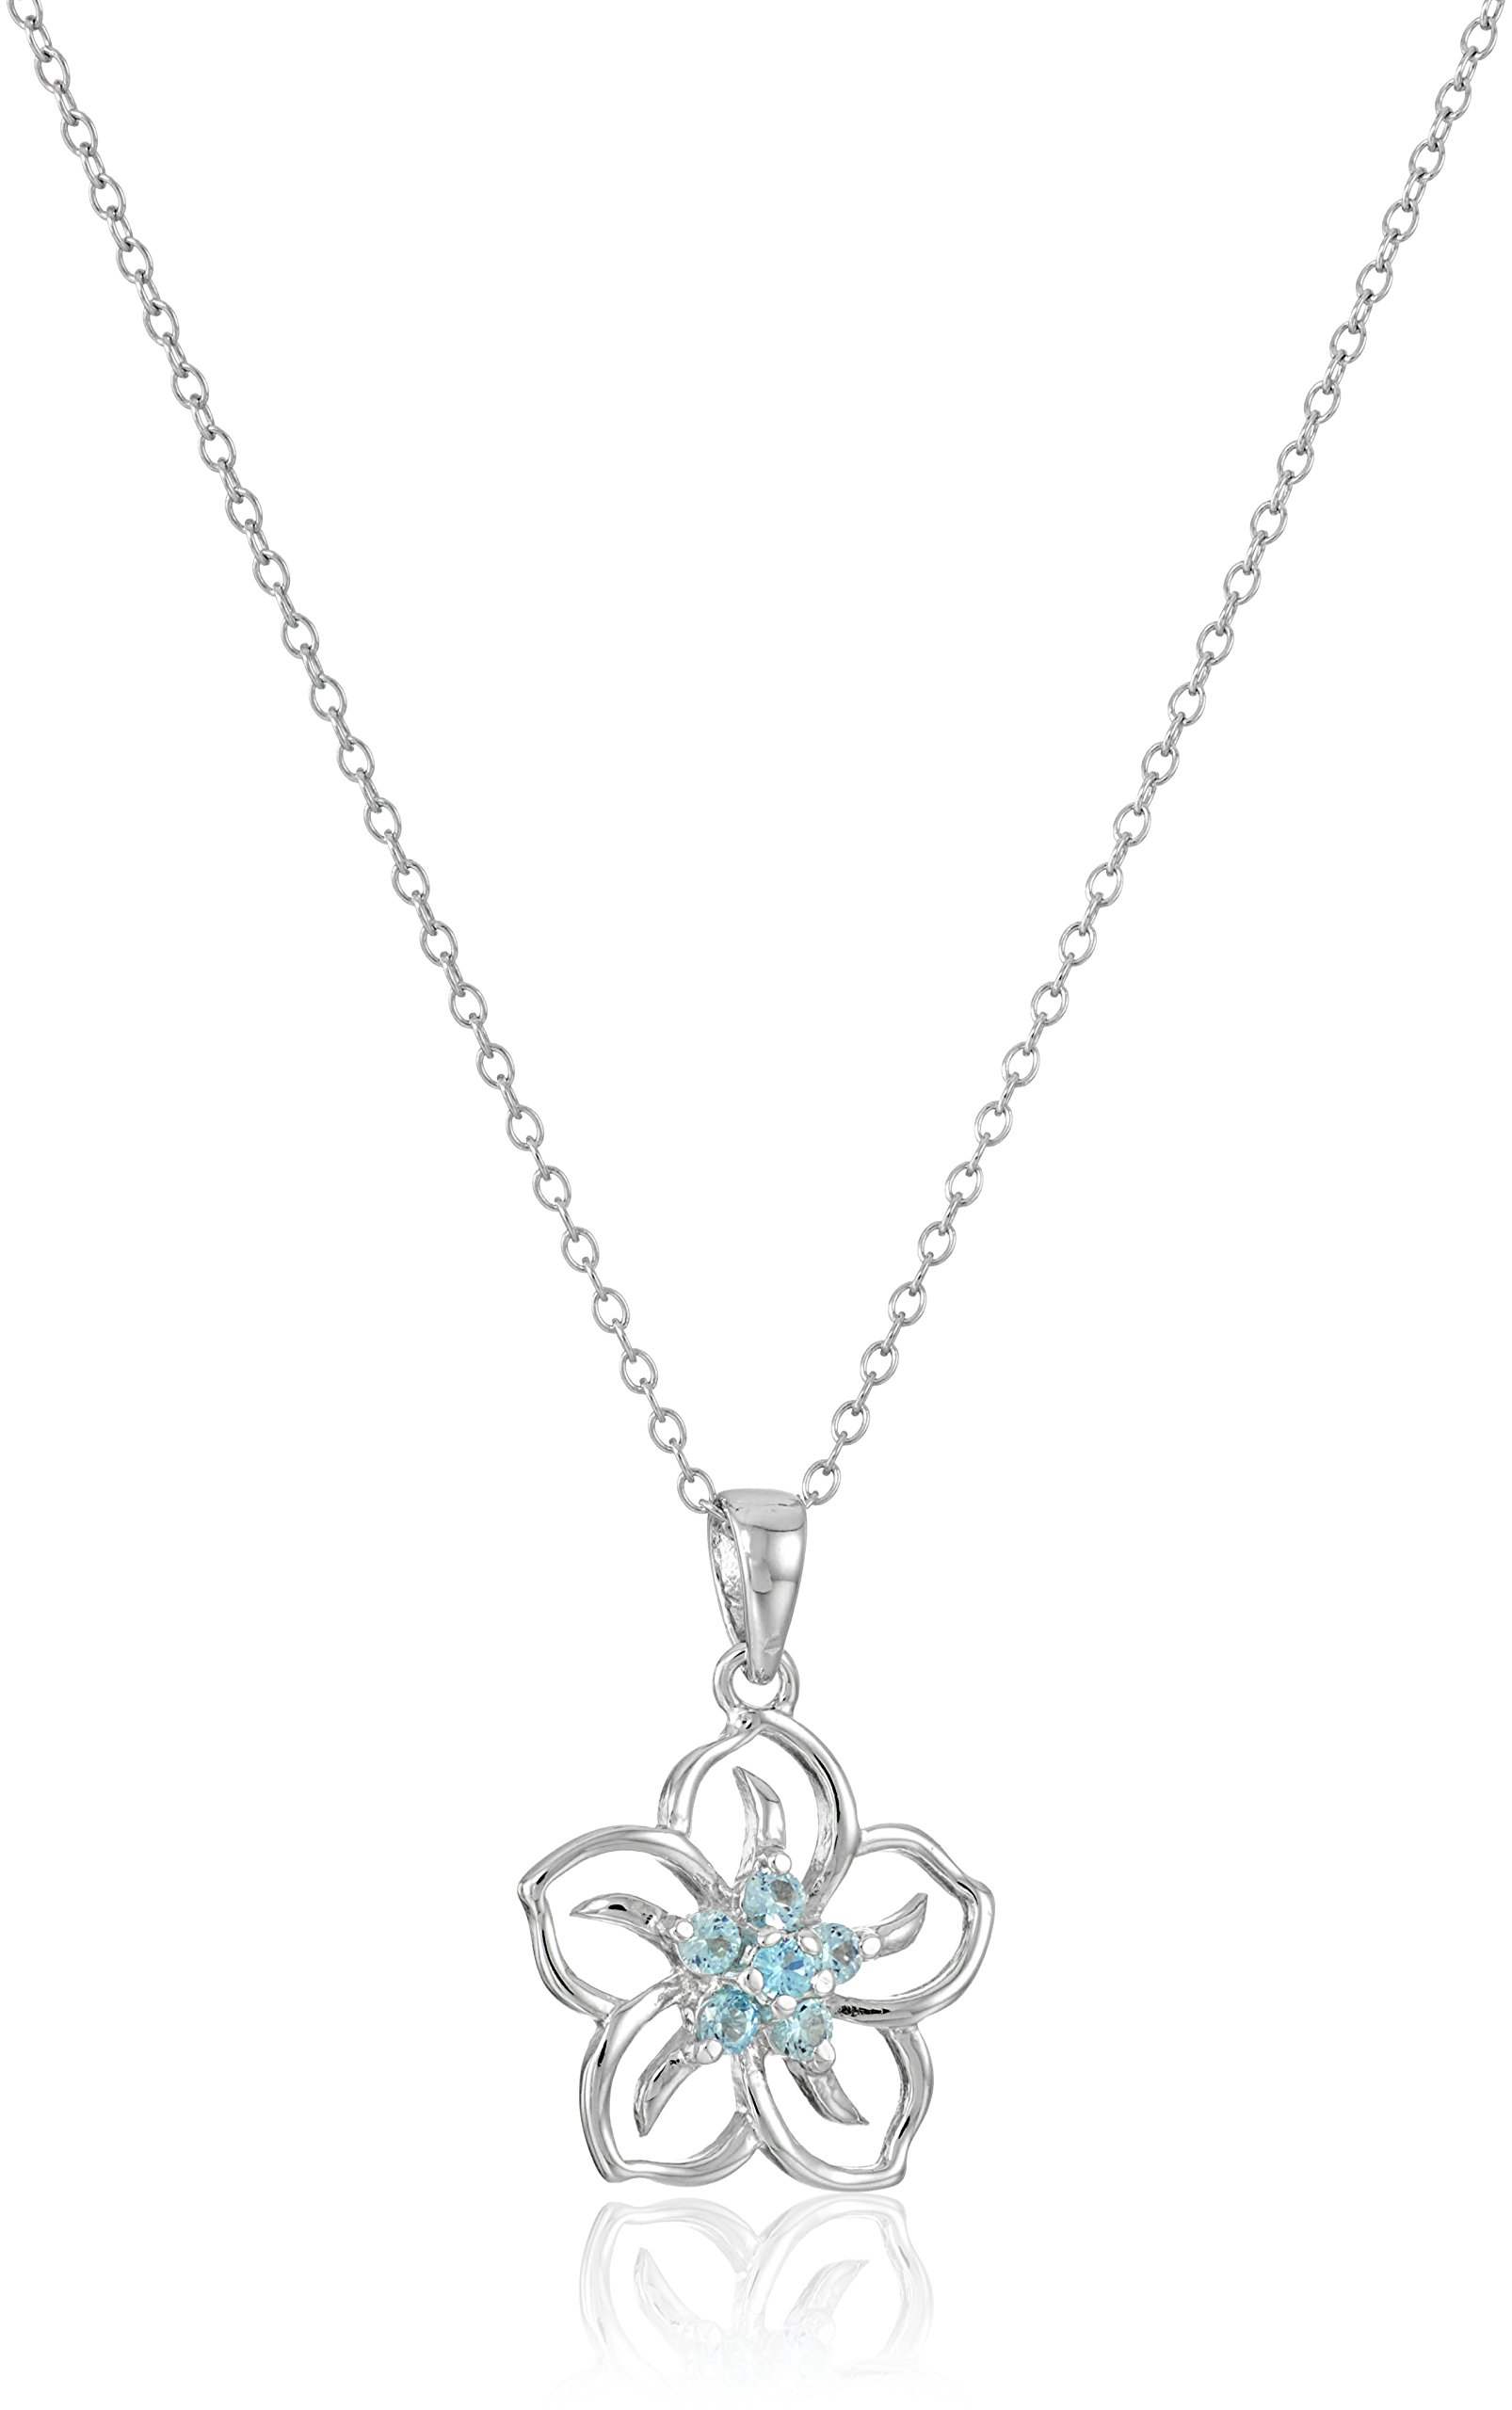 Amazon Collection Sterling Silver Created Aquamarine Flower Pendant Necklace, 18